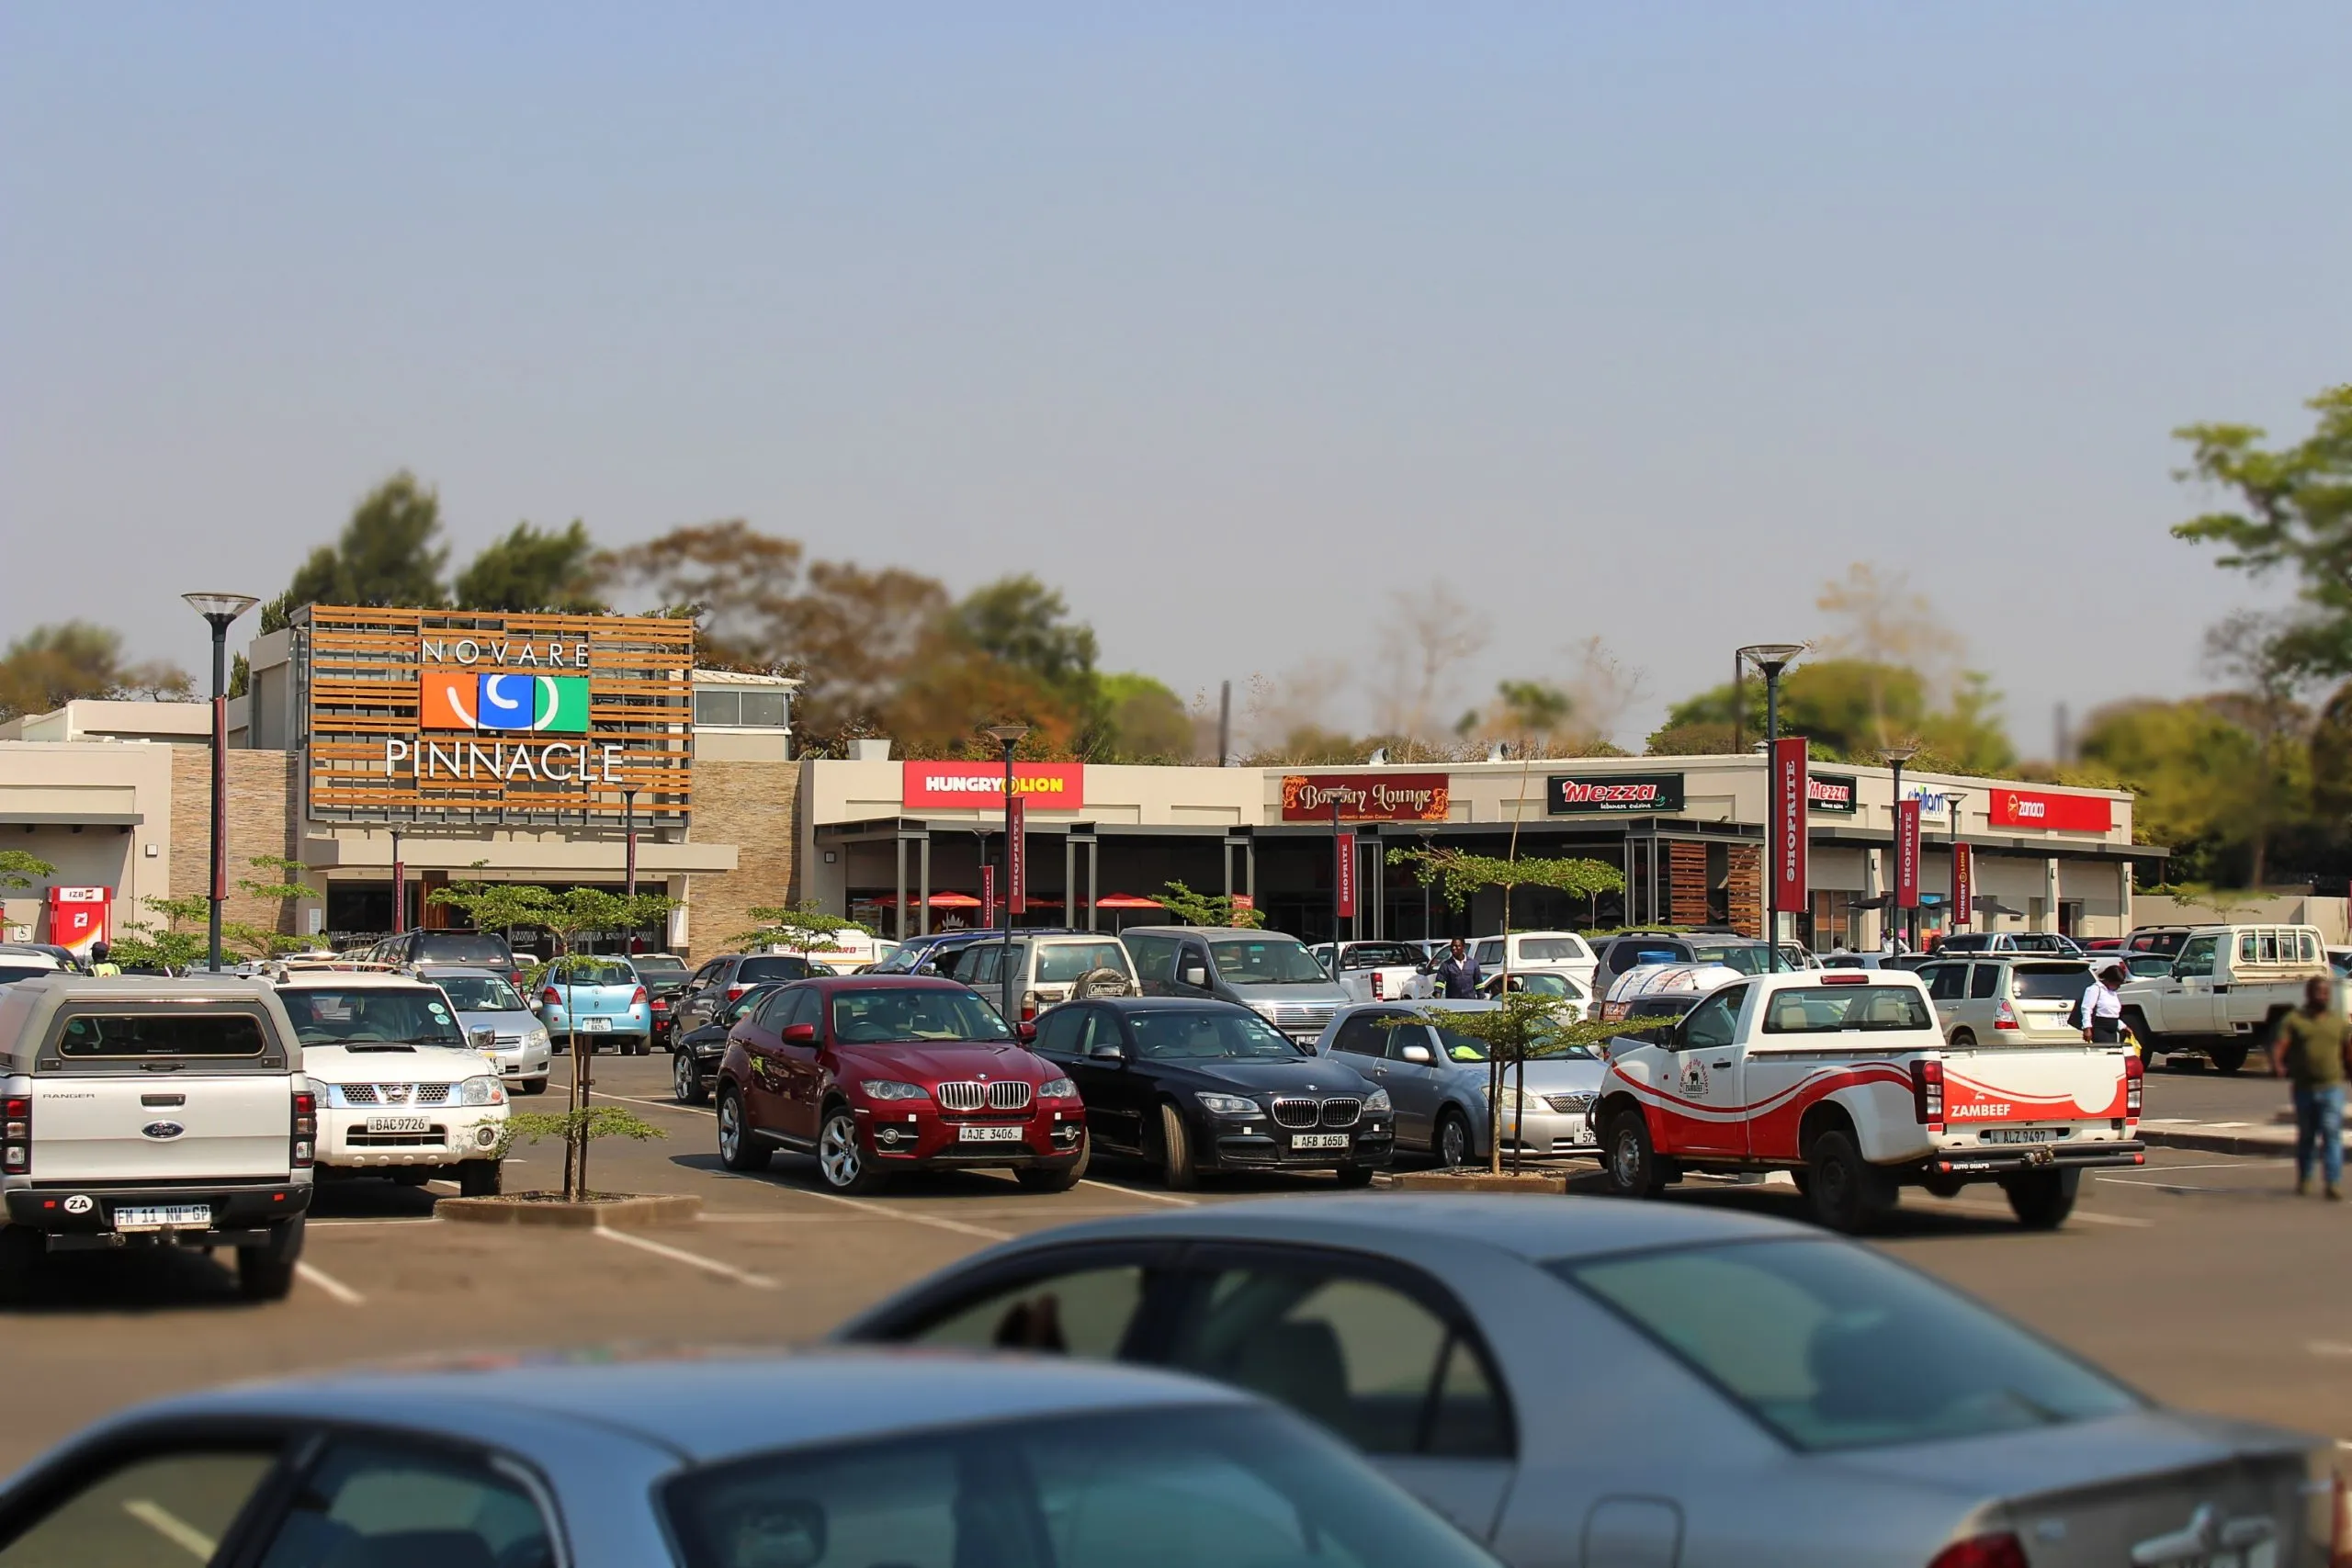 Novare Pinnacle Shopping Mall in Zambia, africa | Fragrance,Shoes,Spices,Clothes,Cosmetics,Sportswear - Country Helper